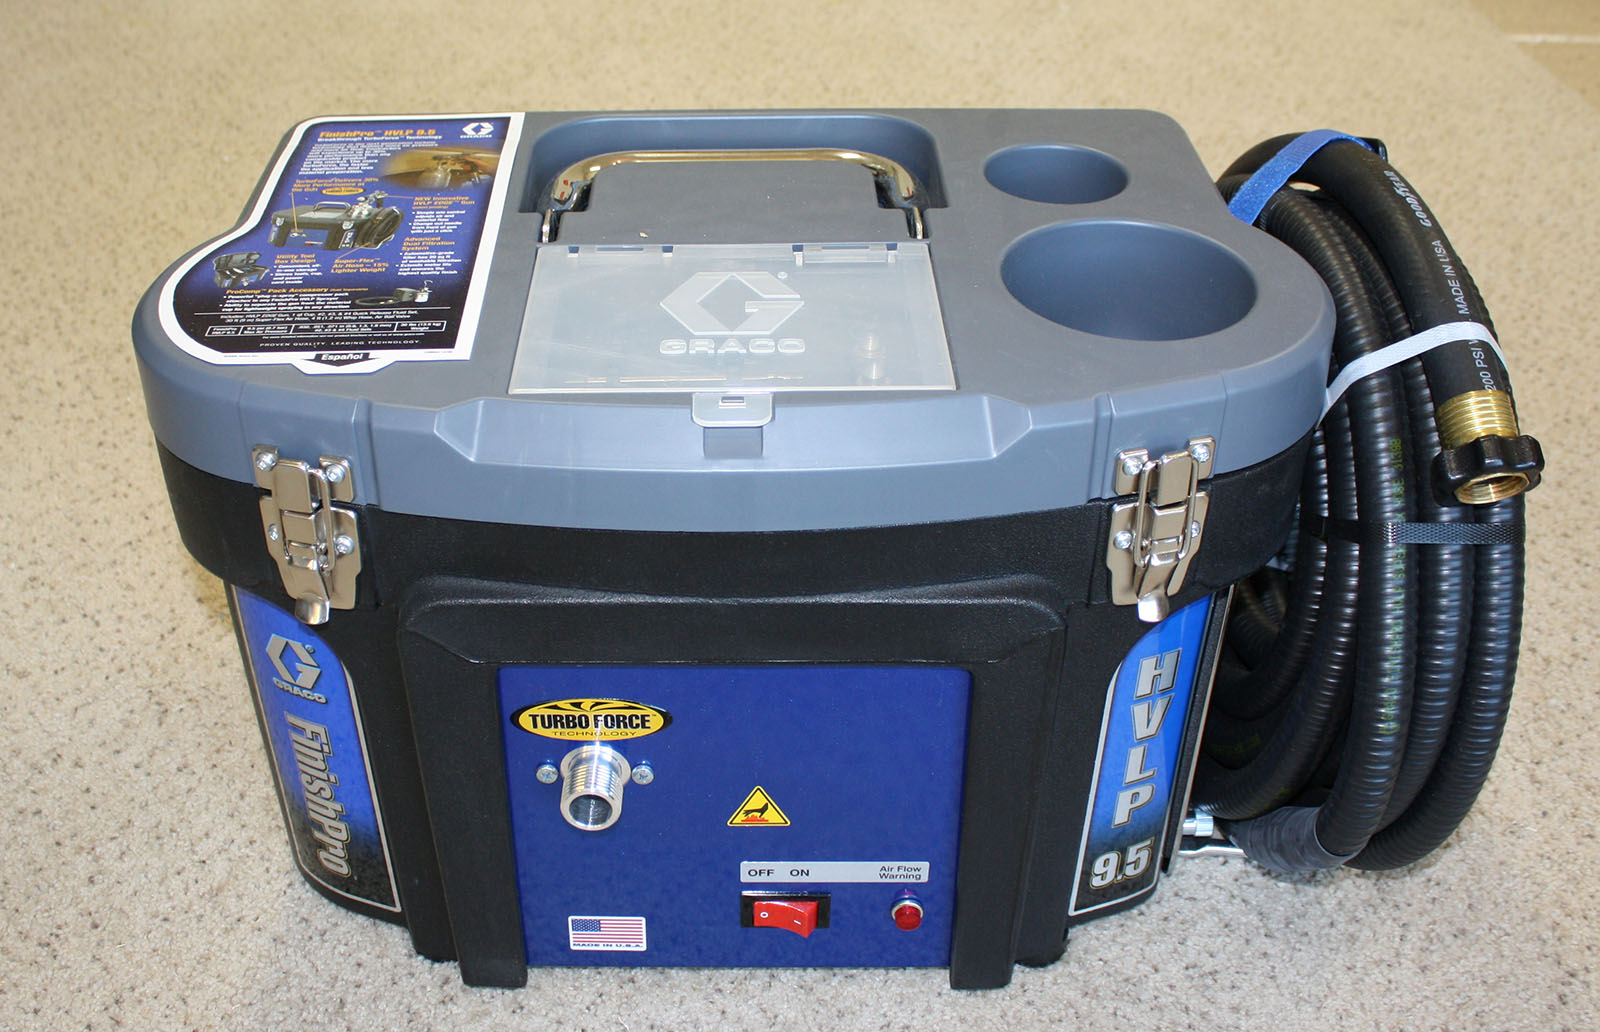 graco-finishpro-hvlp-sprayer-review-the-construction-academy